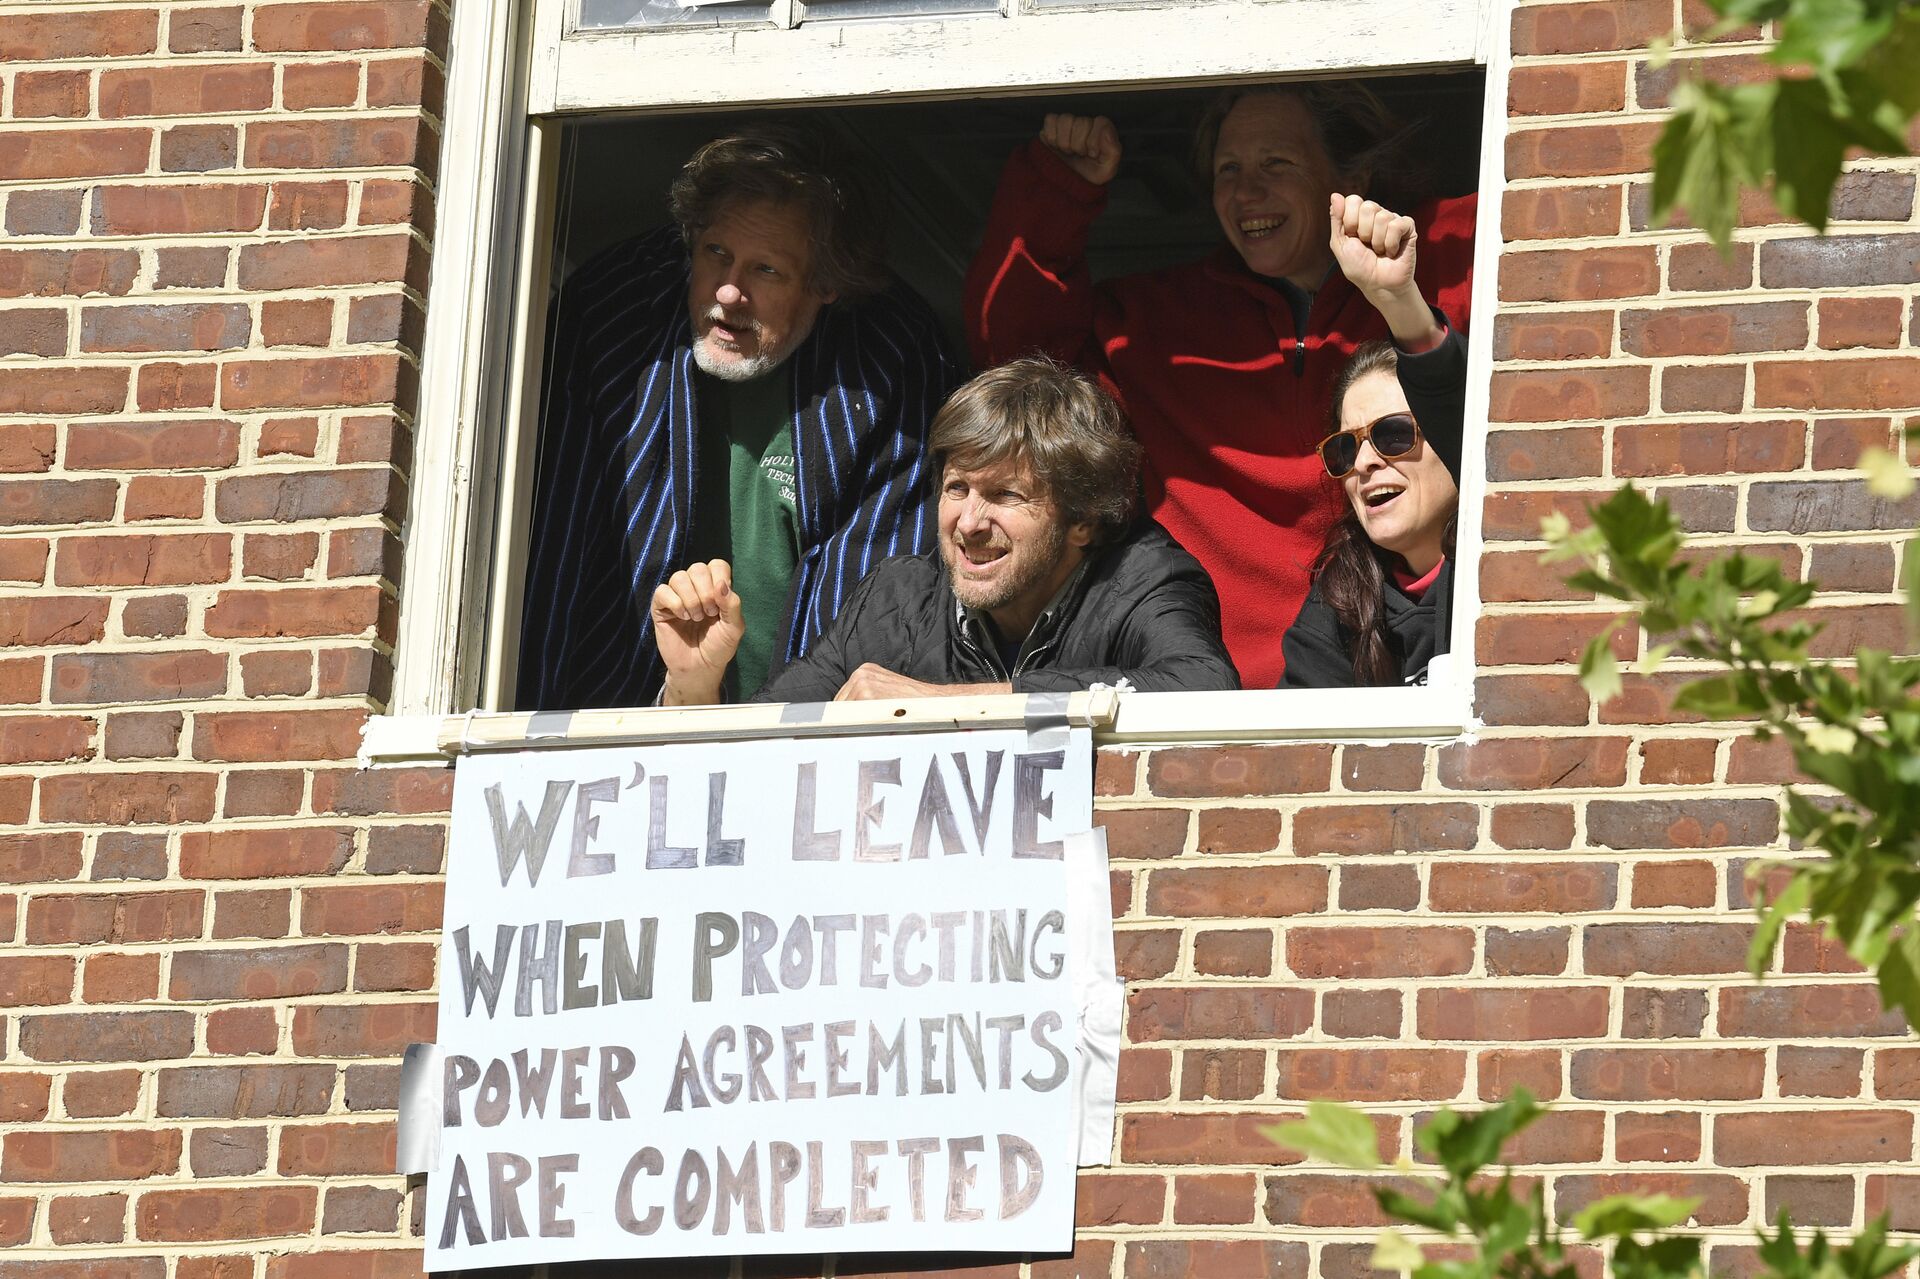 The four activists inside the Venezuelan embassy in Washington look outside the window from a second floor on Tuesday, May 14, 2019. Clockwise from left: Kevin Zeese, Margaret Flowers, Adrienne Pine, and David Paul. - Sputnik International, 1920, 06.01.2023